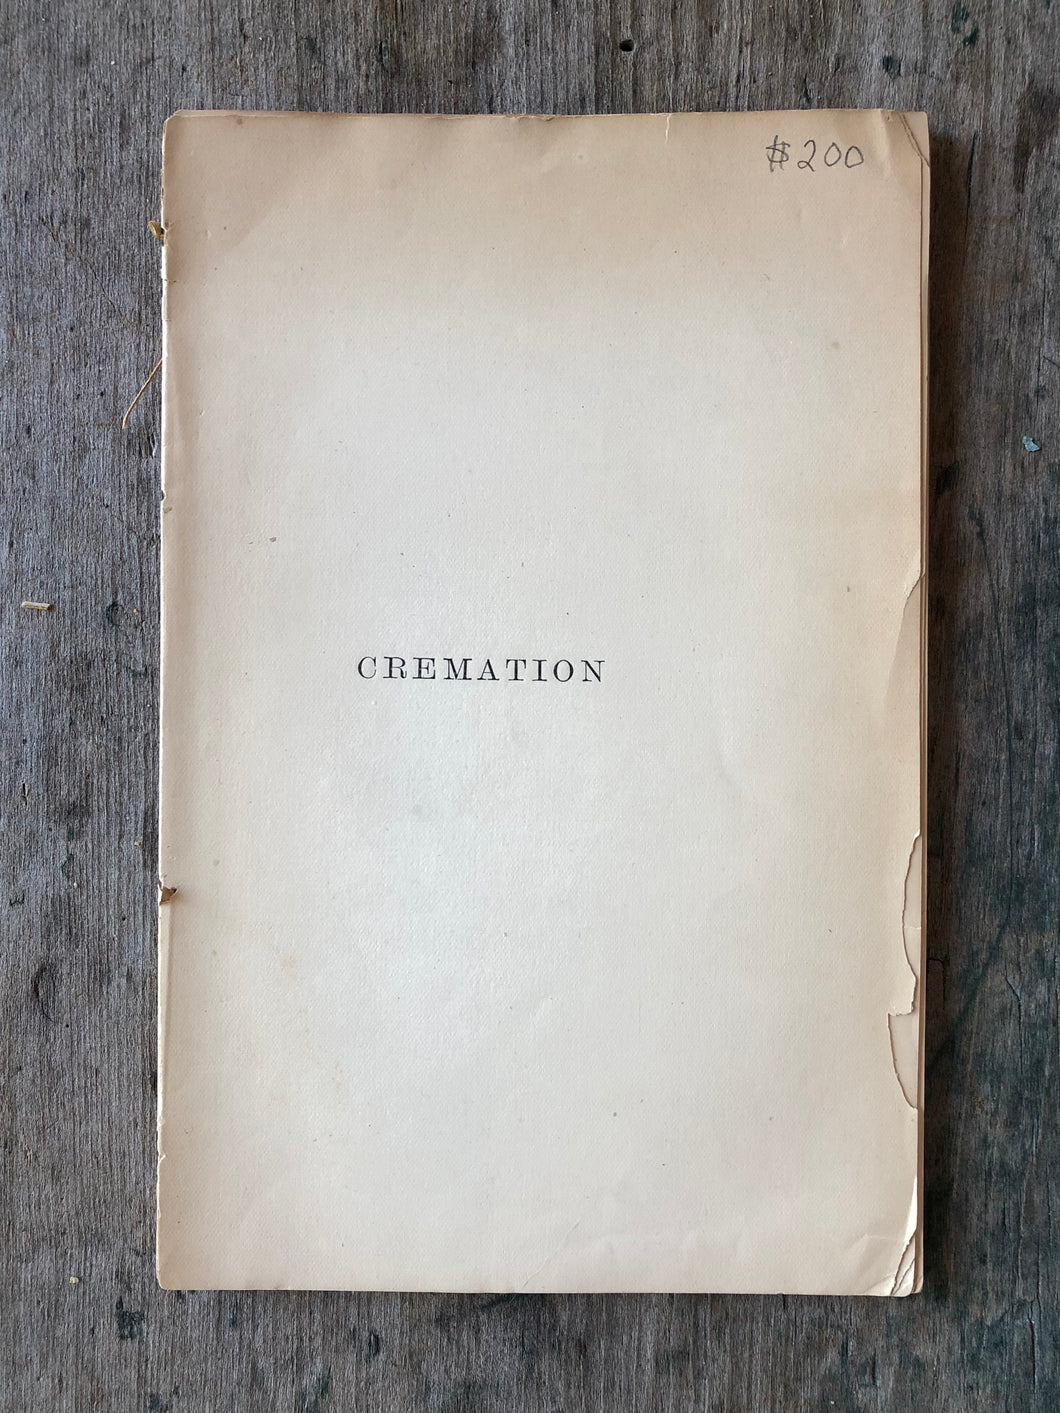 Cremation: The Treatment of the Body After Death by Sir Henry Thompson